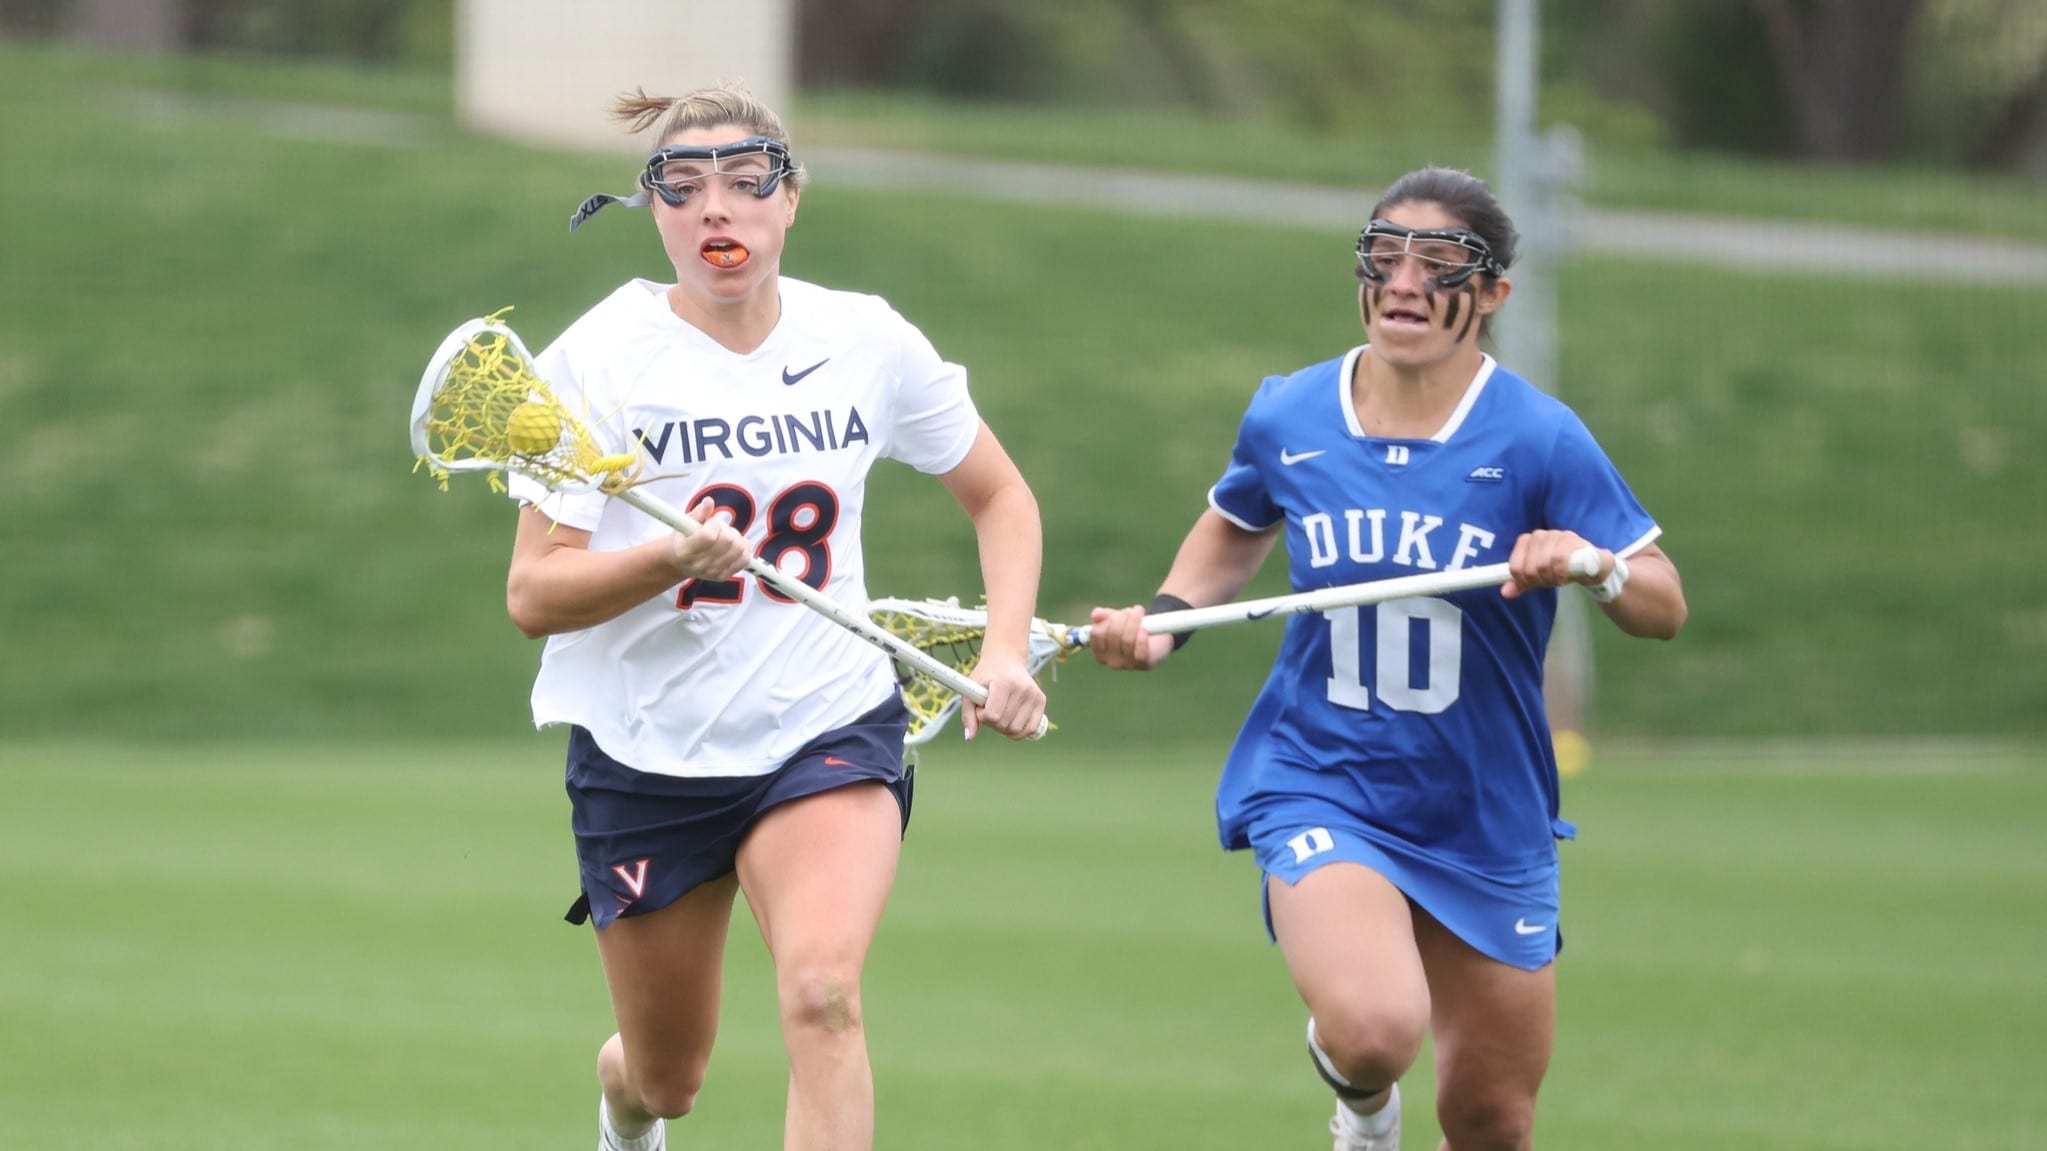 Maggie Bostain clears the ball during the Virginia women's lacrosse game against Duke.